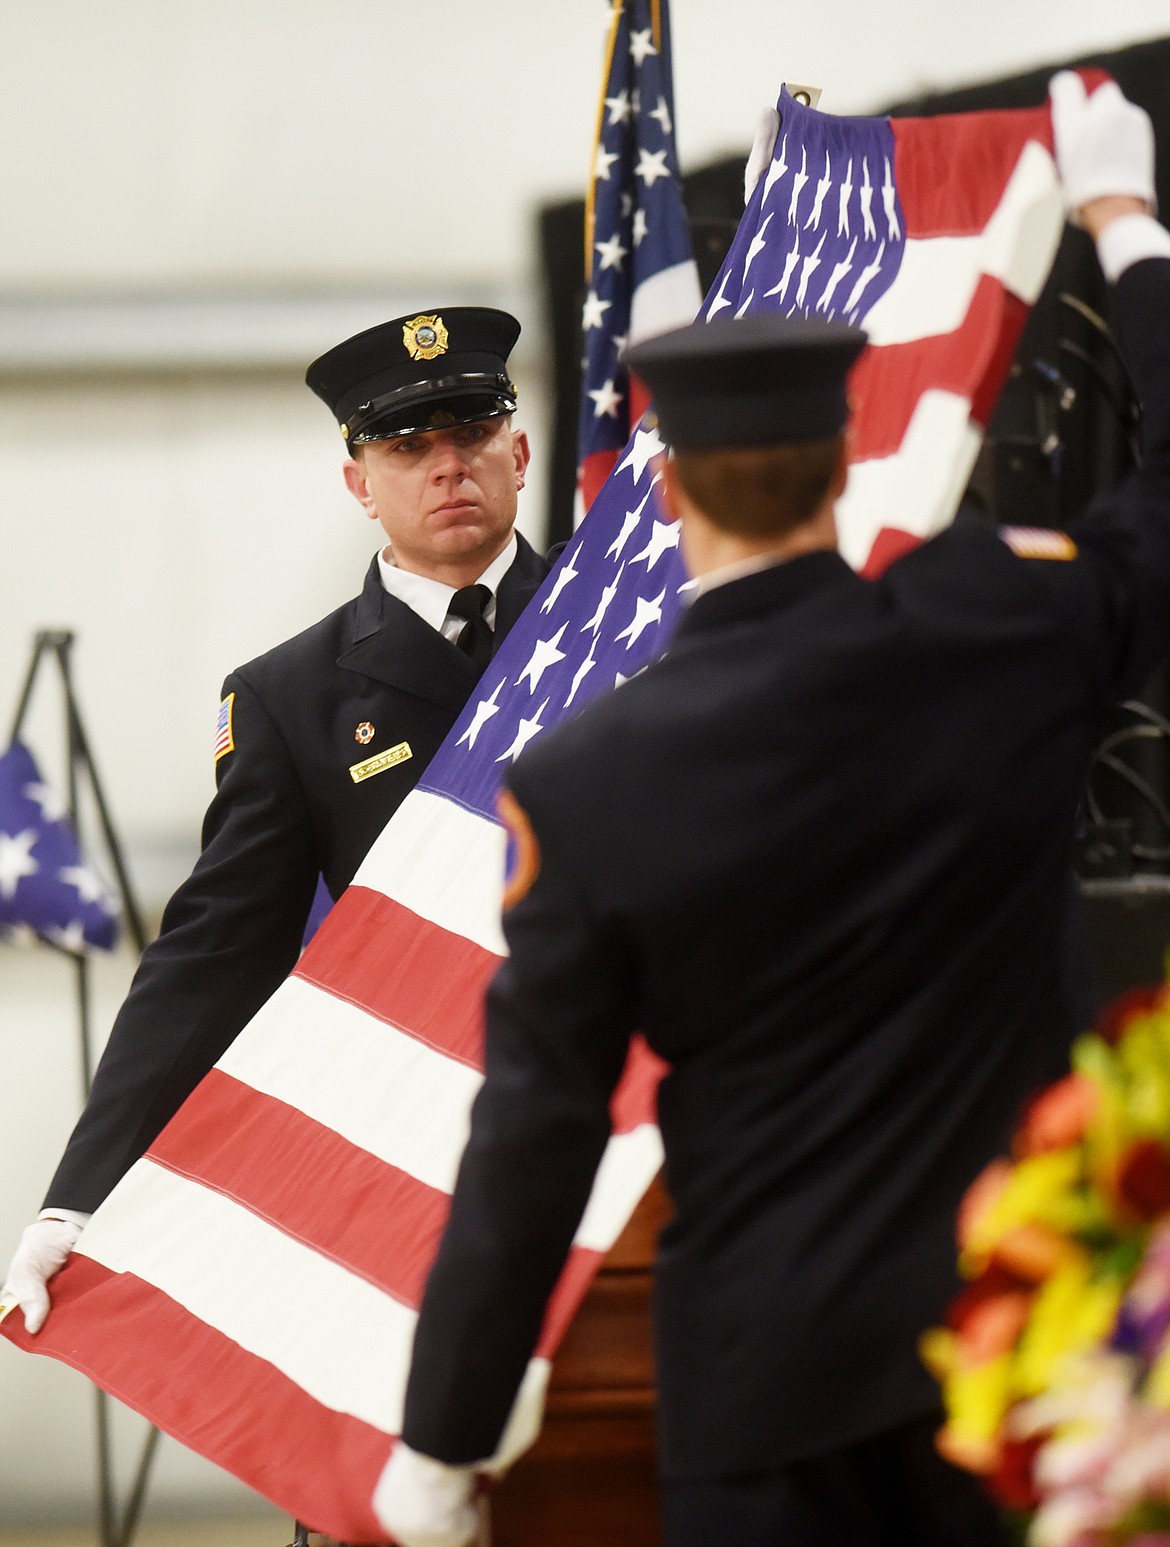 Josh Charles of the Bozeman Fire Department helps fold the flag that had been draped over Ben Parsons&#146; casket at the end of the funeral on Thursday, January 12, at the Northwest Montana Fairgrounds. Firefighters, law enforcement officers and first responders from around the state came to attend and take part in the funeral.&#160;
(Brenda Ahearn/Daily Inter Lake)